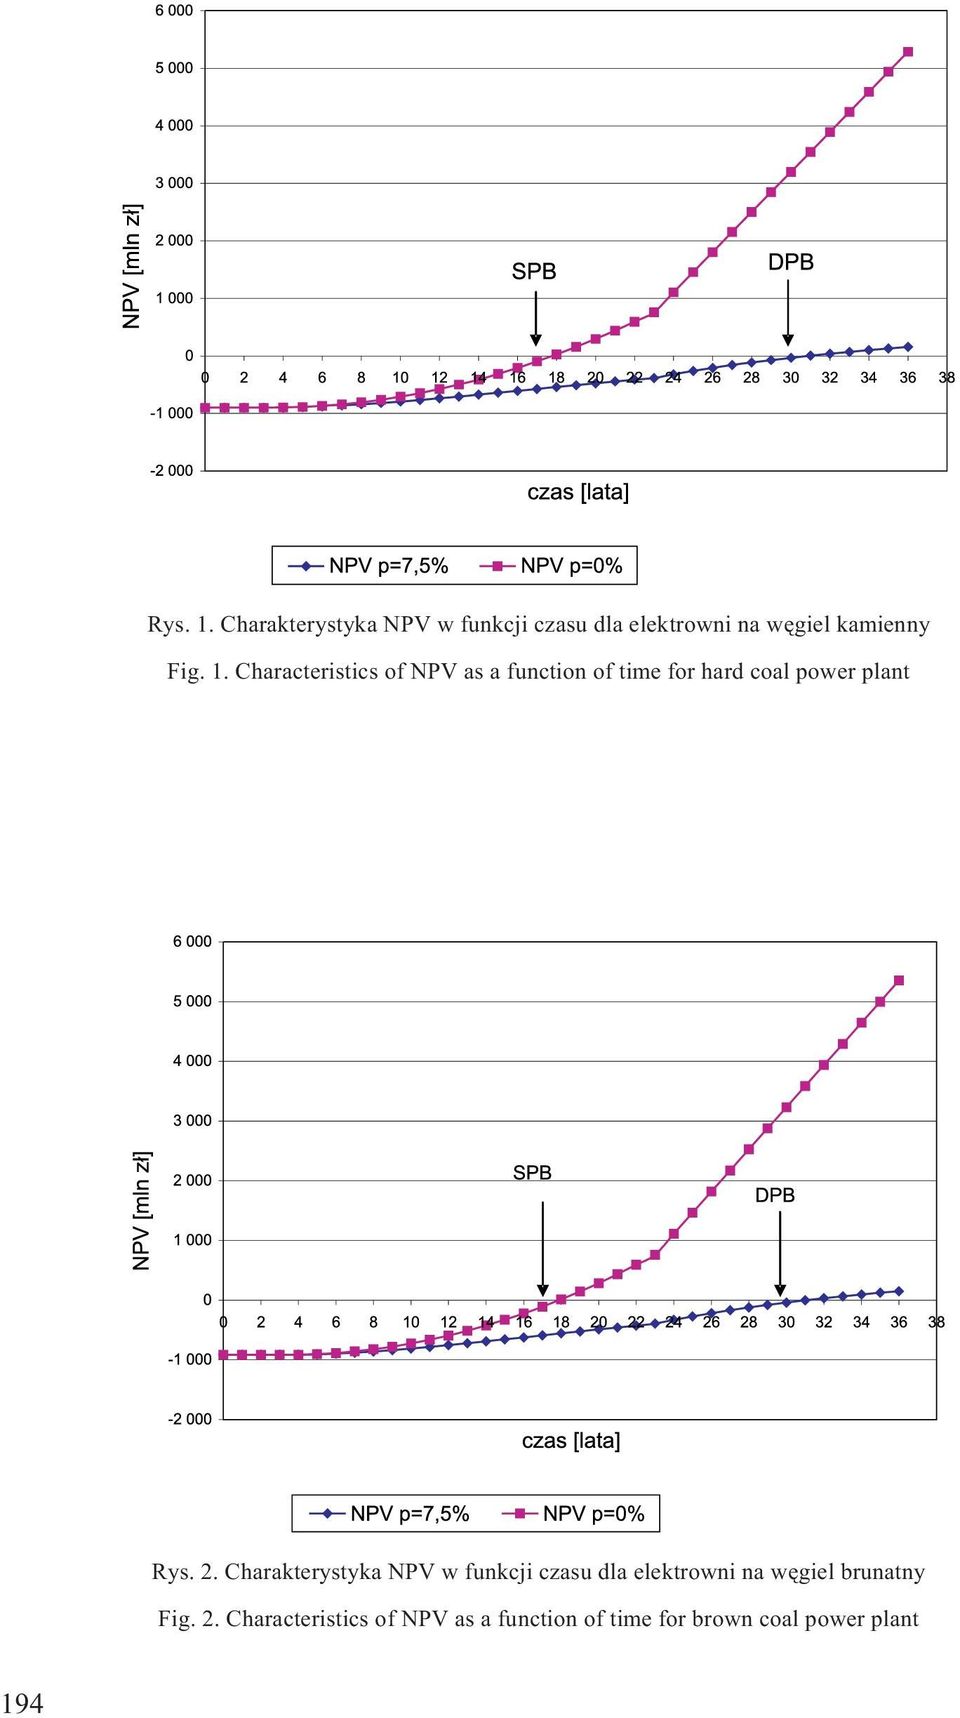 Characteristics of NPV as a function of time for hard coal power plant Rys. 2.